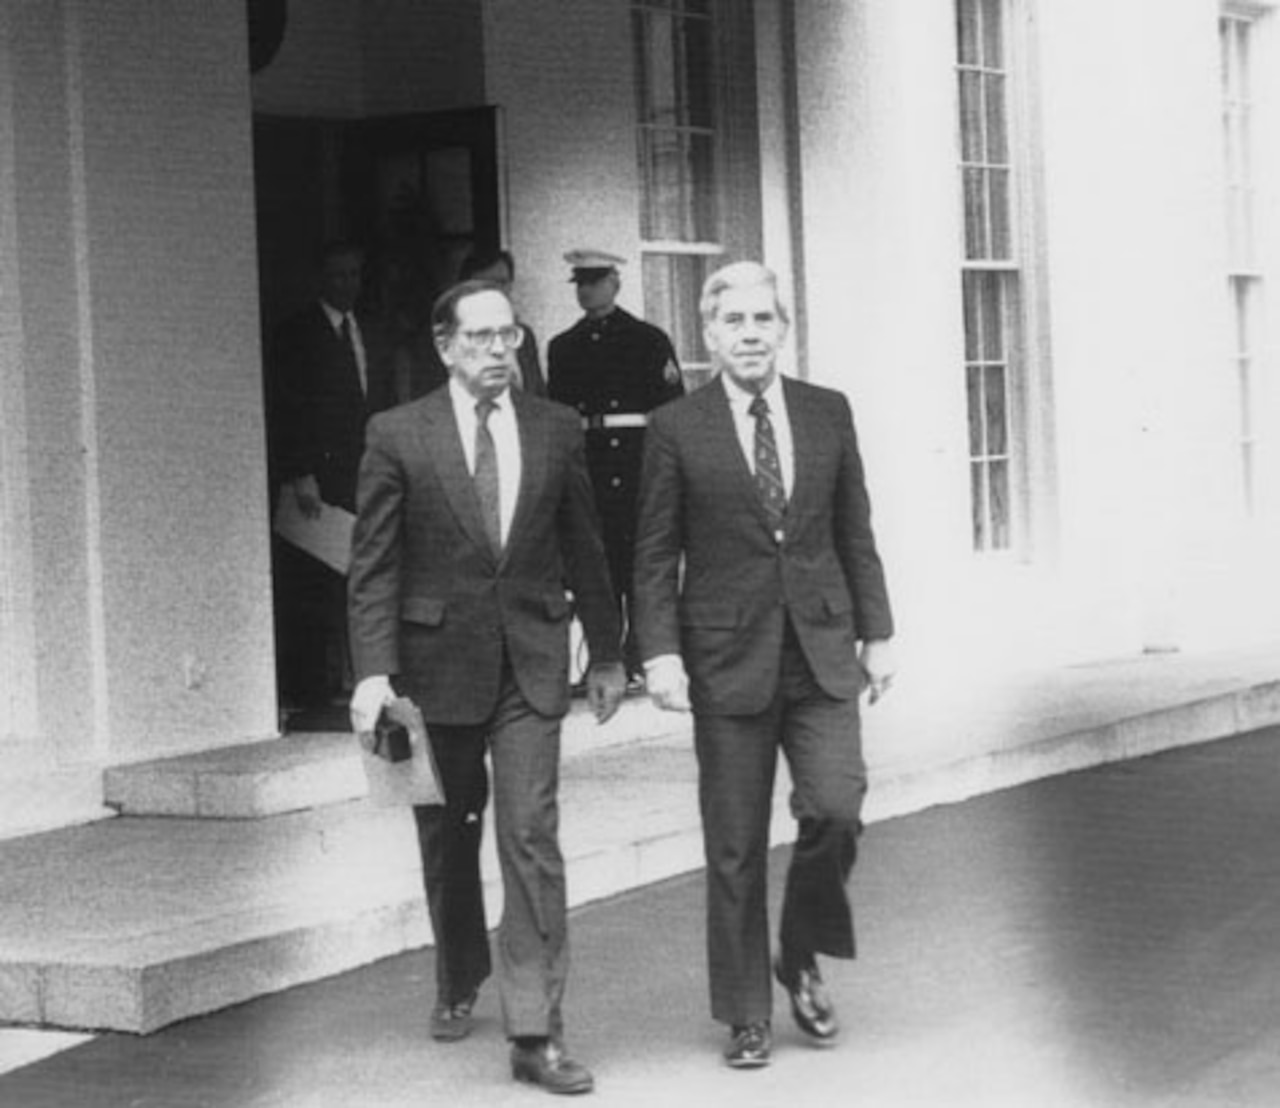 Then-U.S. Sens. Sam Nunn, left, and Richard Lugar leave the White House in 1991 after briefing then-President George H.W. Bush on their cooperative threat reduction legislation. U.S. Senate photo